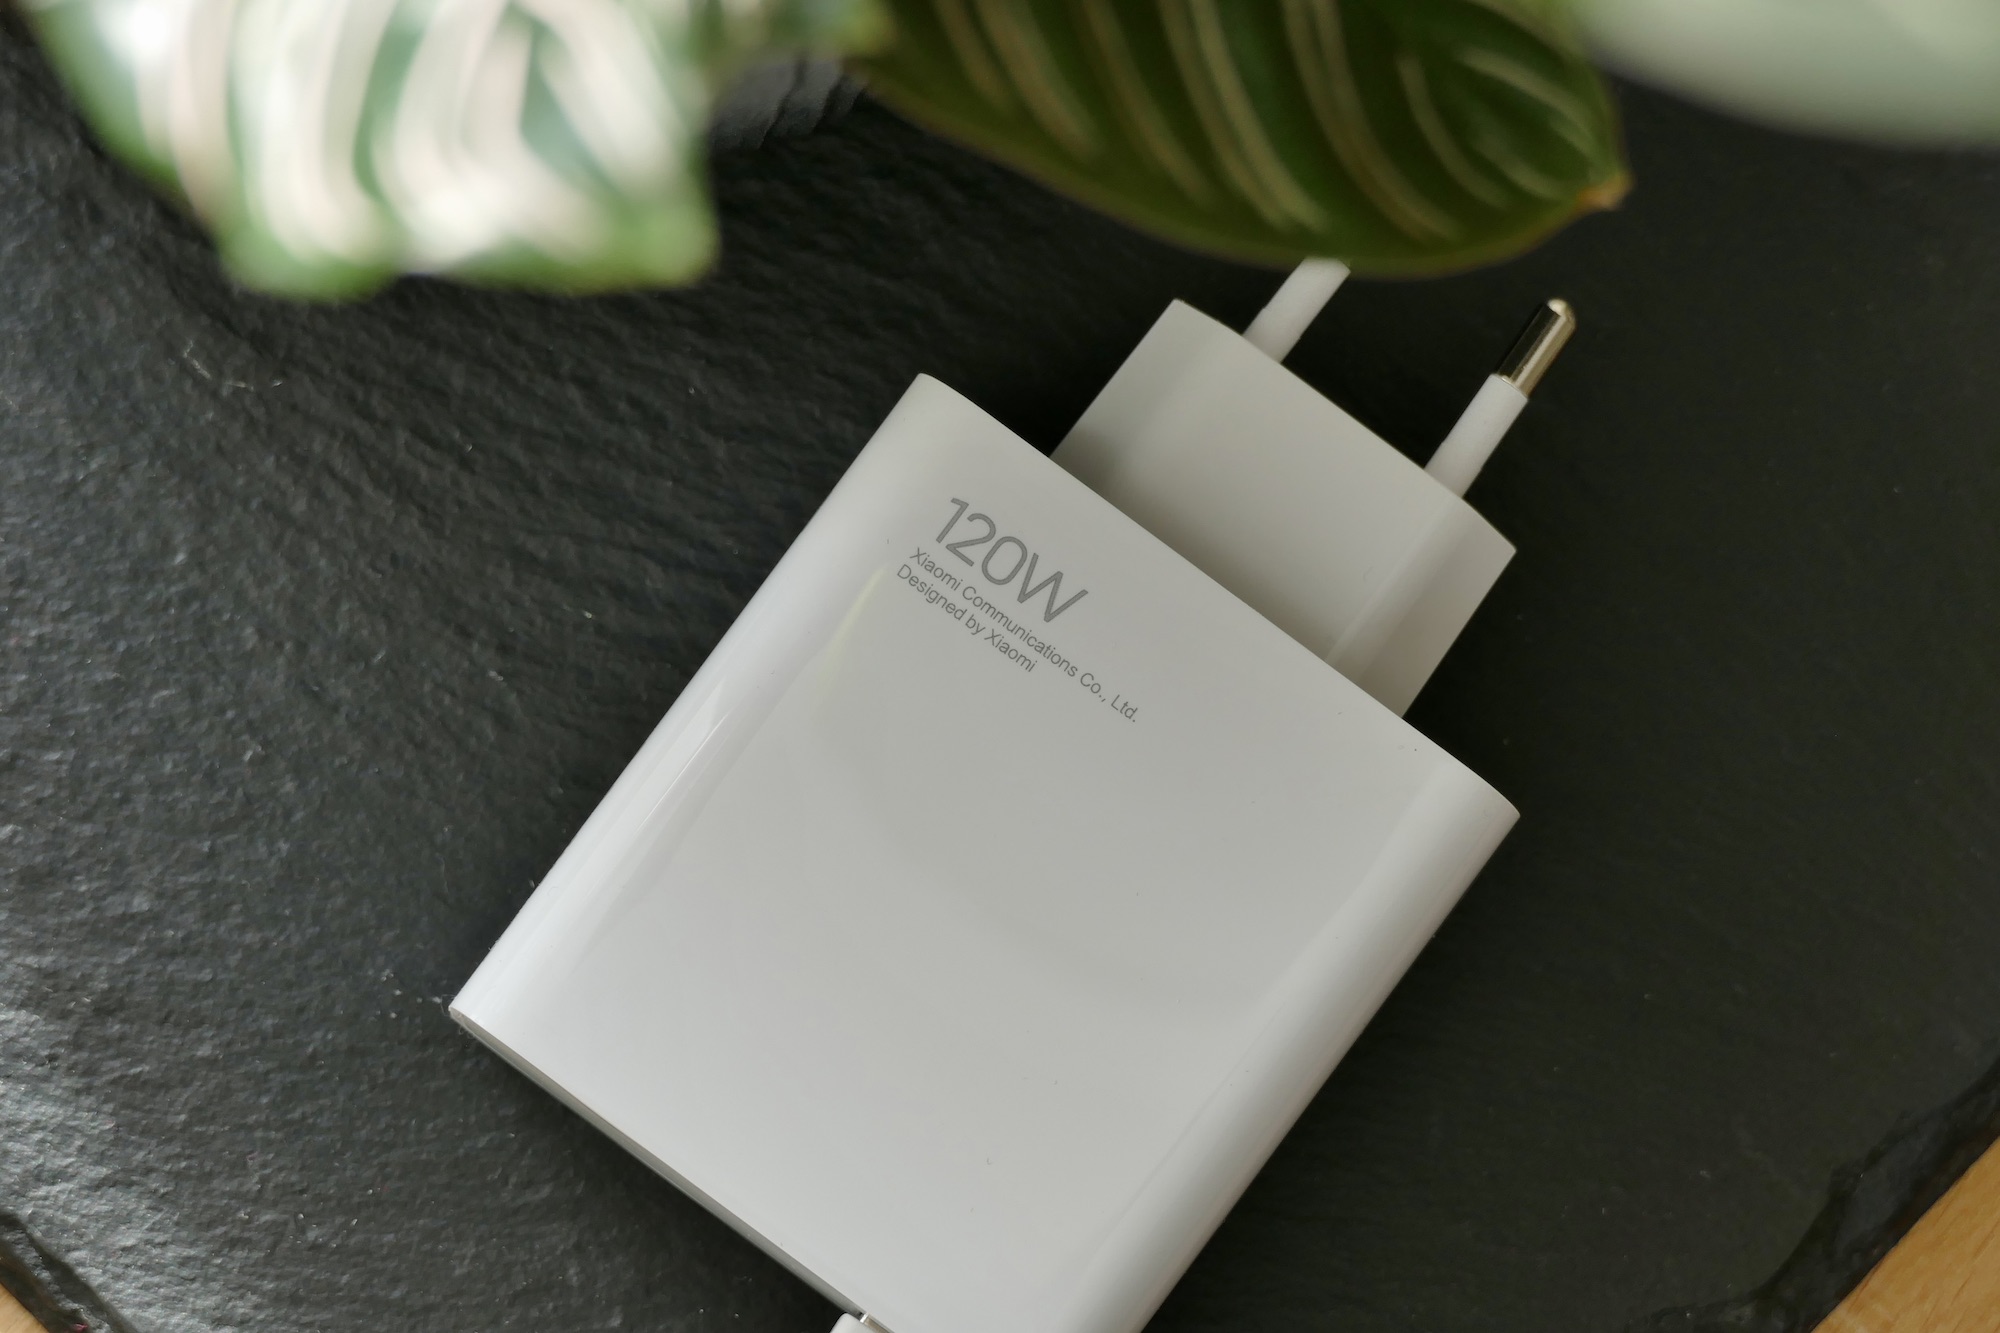 Xiaomi 12 Pro 120W HyperCharge charger.